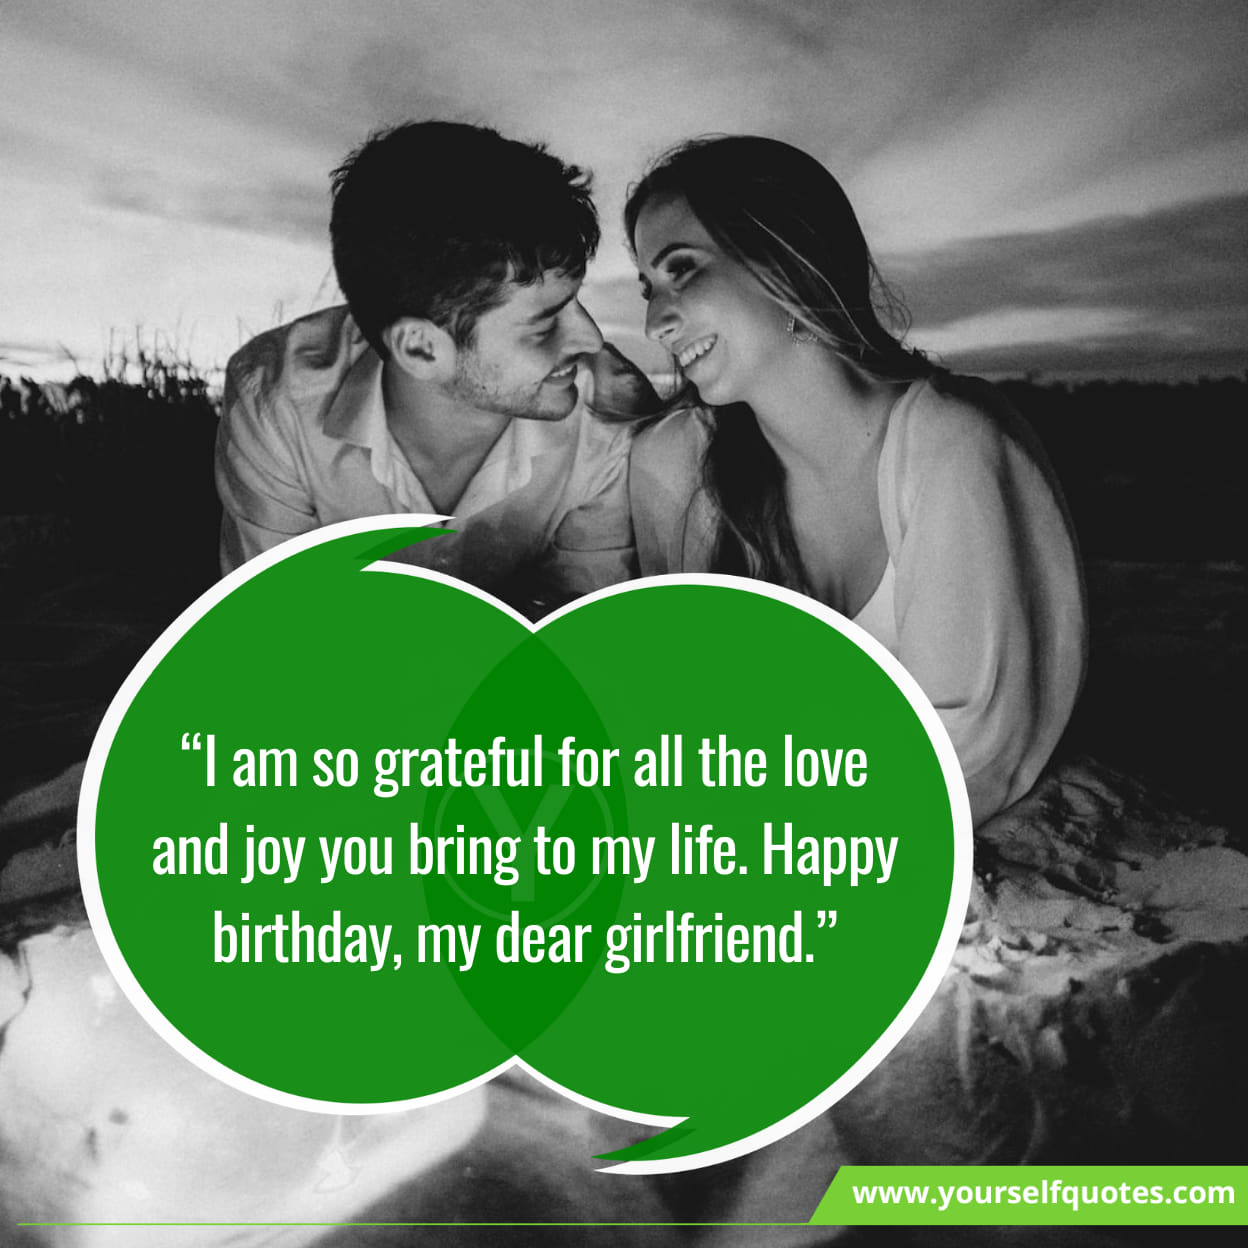 Alluring Birthday Messages For Girlfriend